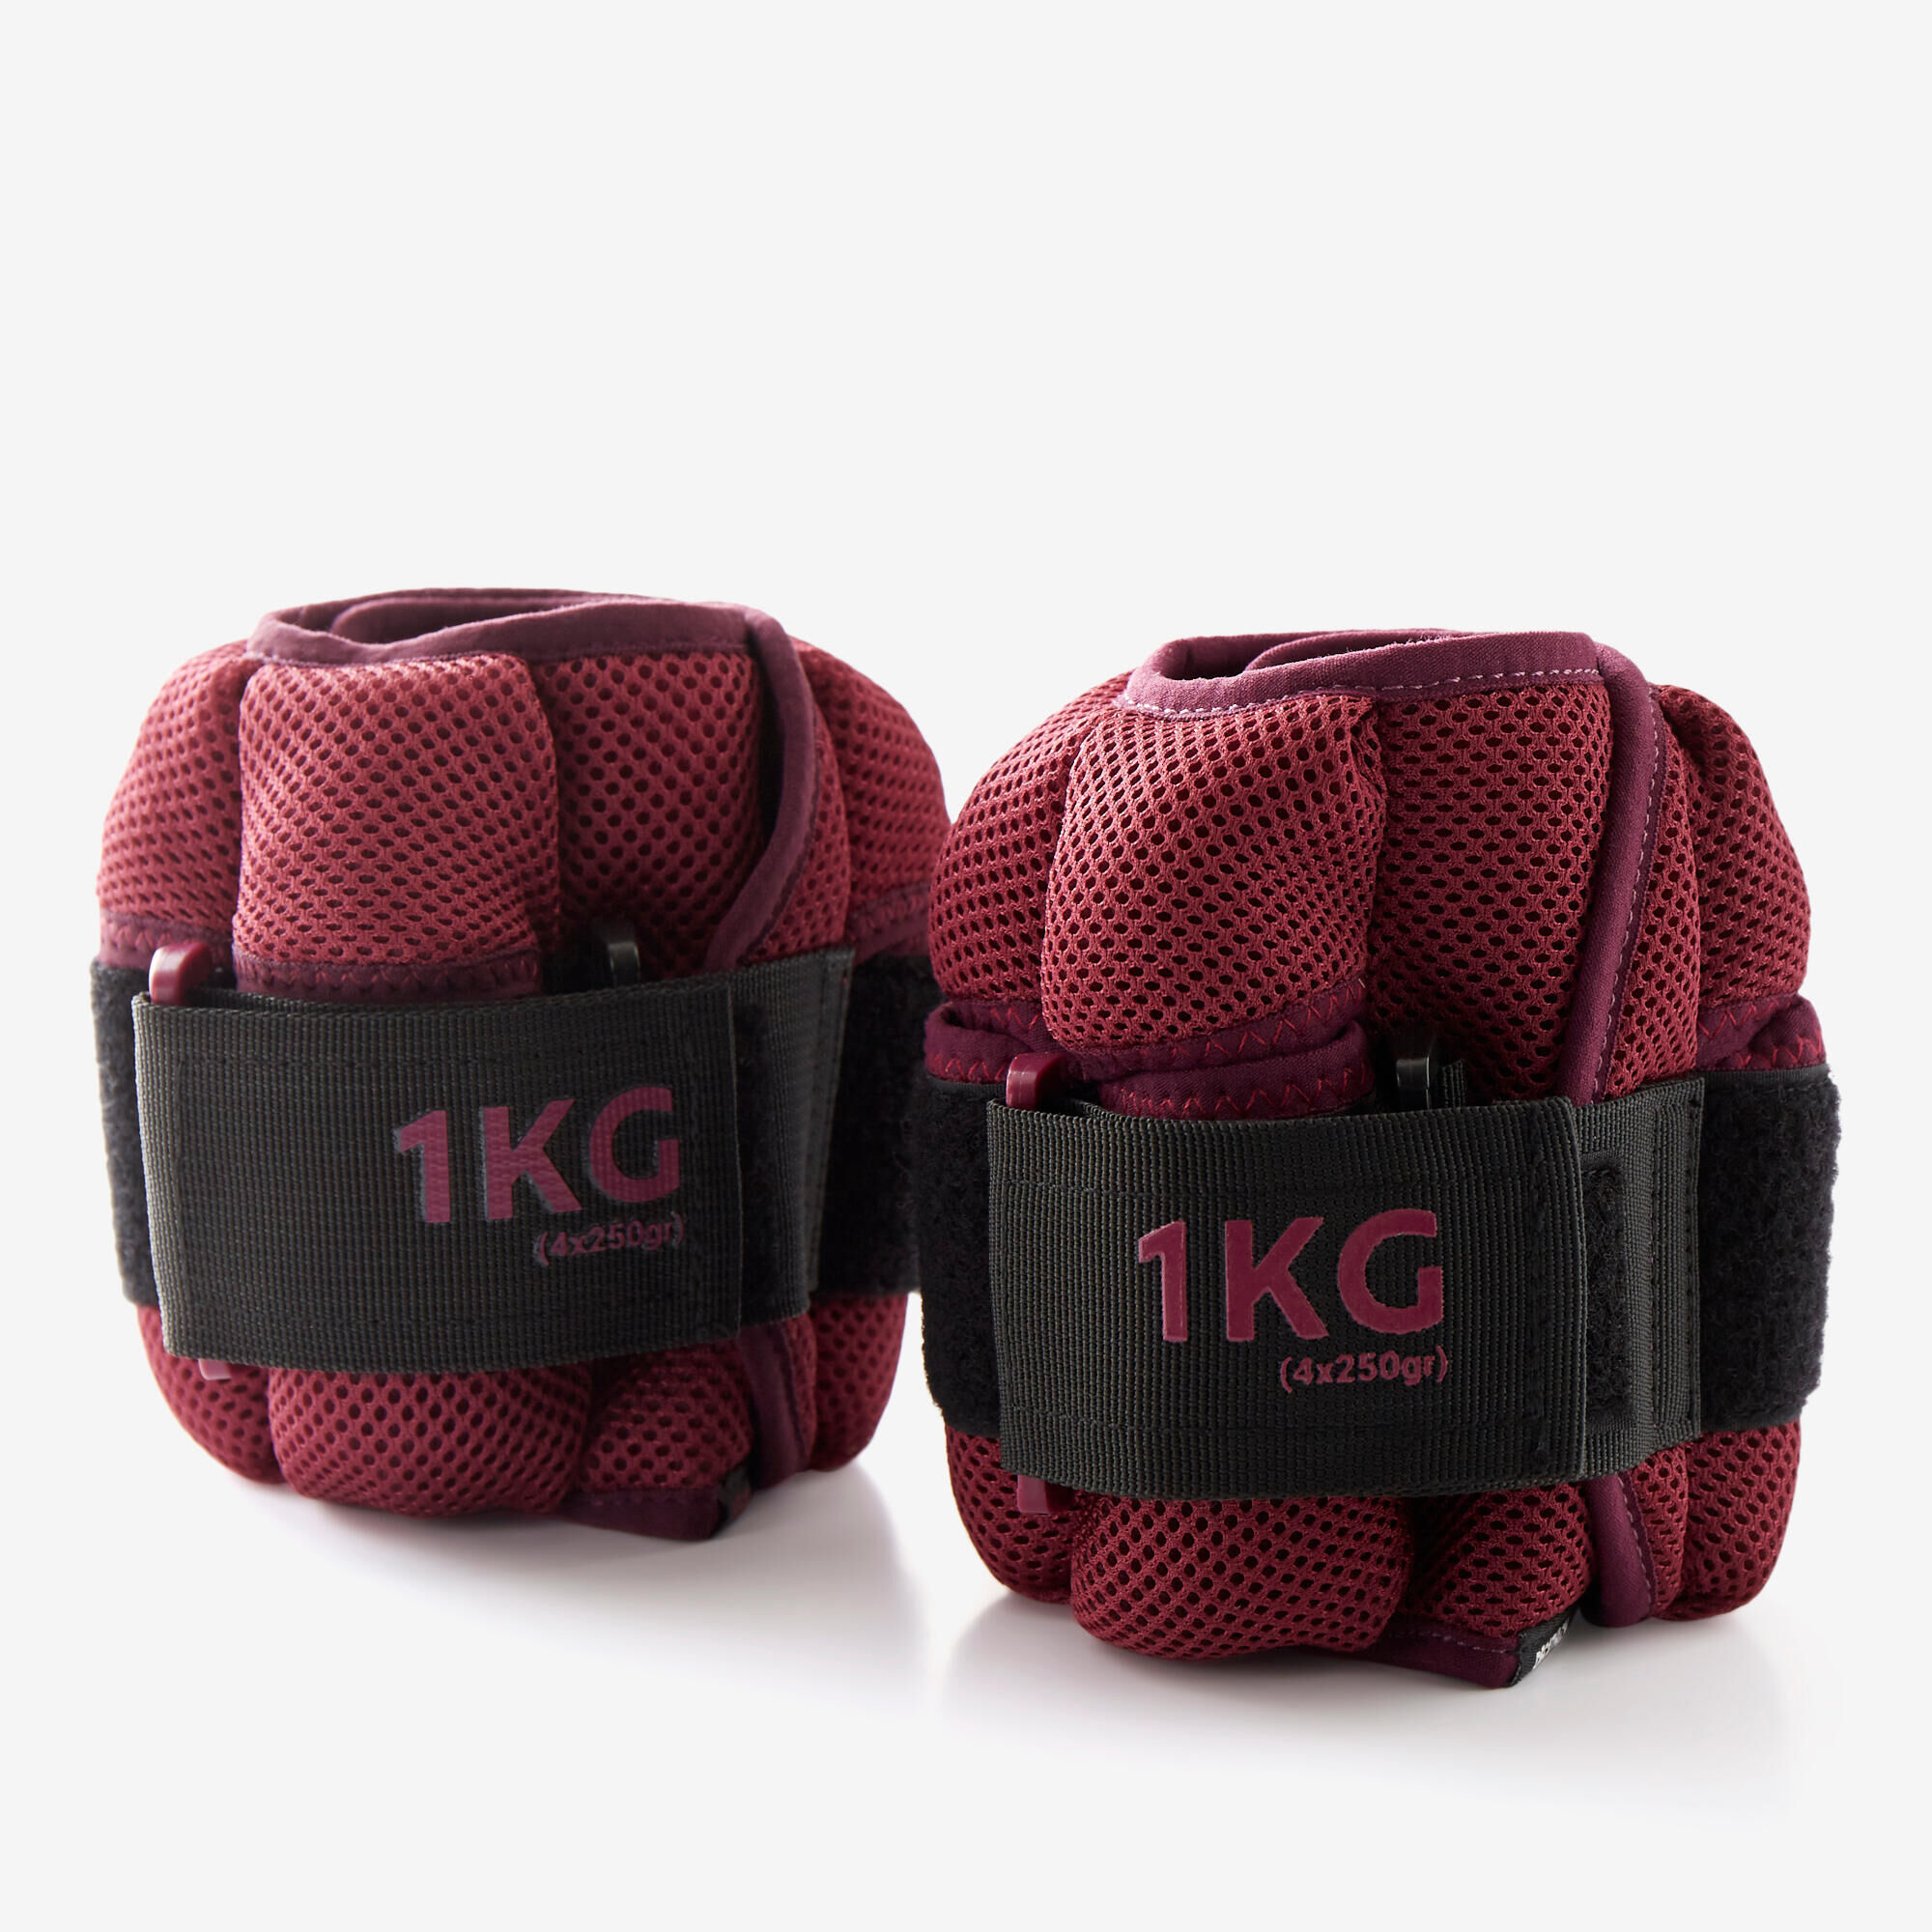 DOMYOS 1 kg Adjustable Wrist / Ankle Weights Twin-Pack - Burgundy